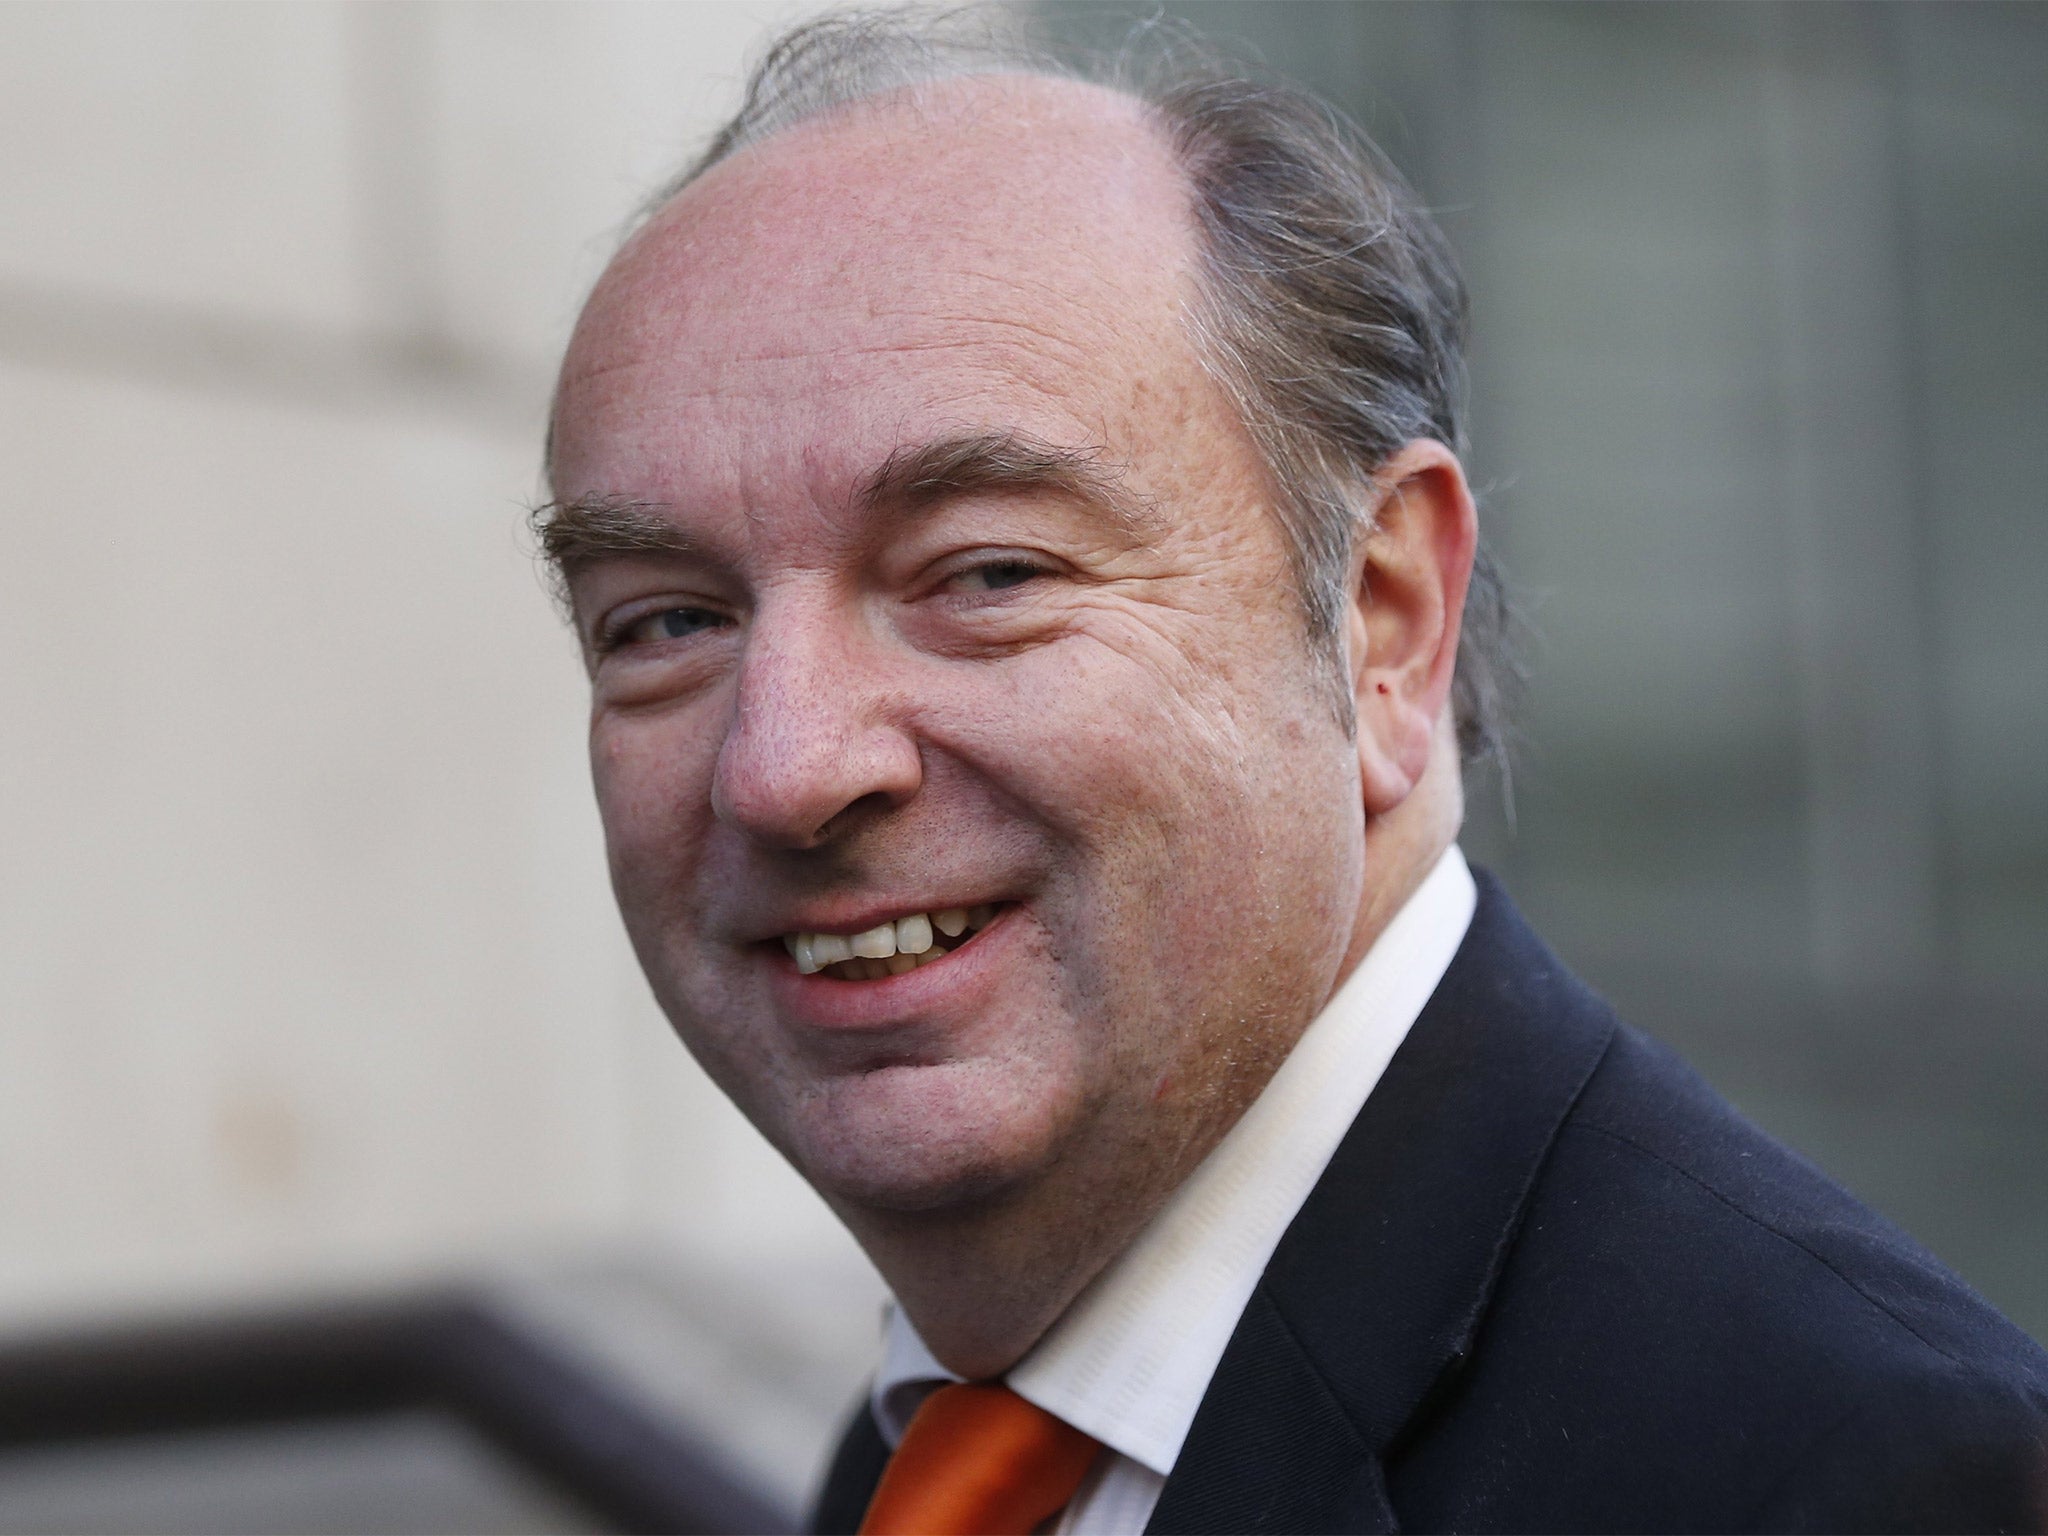 Liberal Democrat Norman Baker resigned as Home Office minister on Monday night